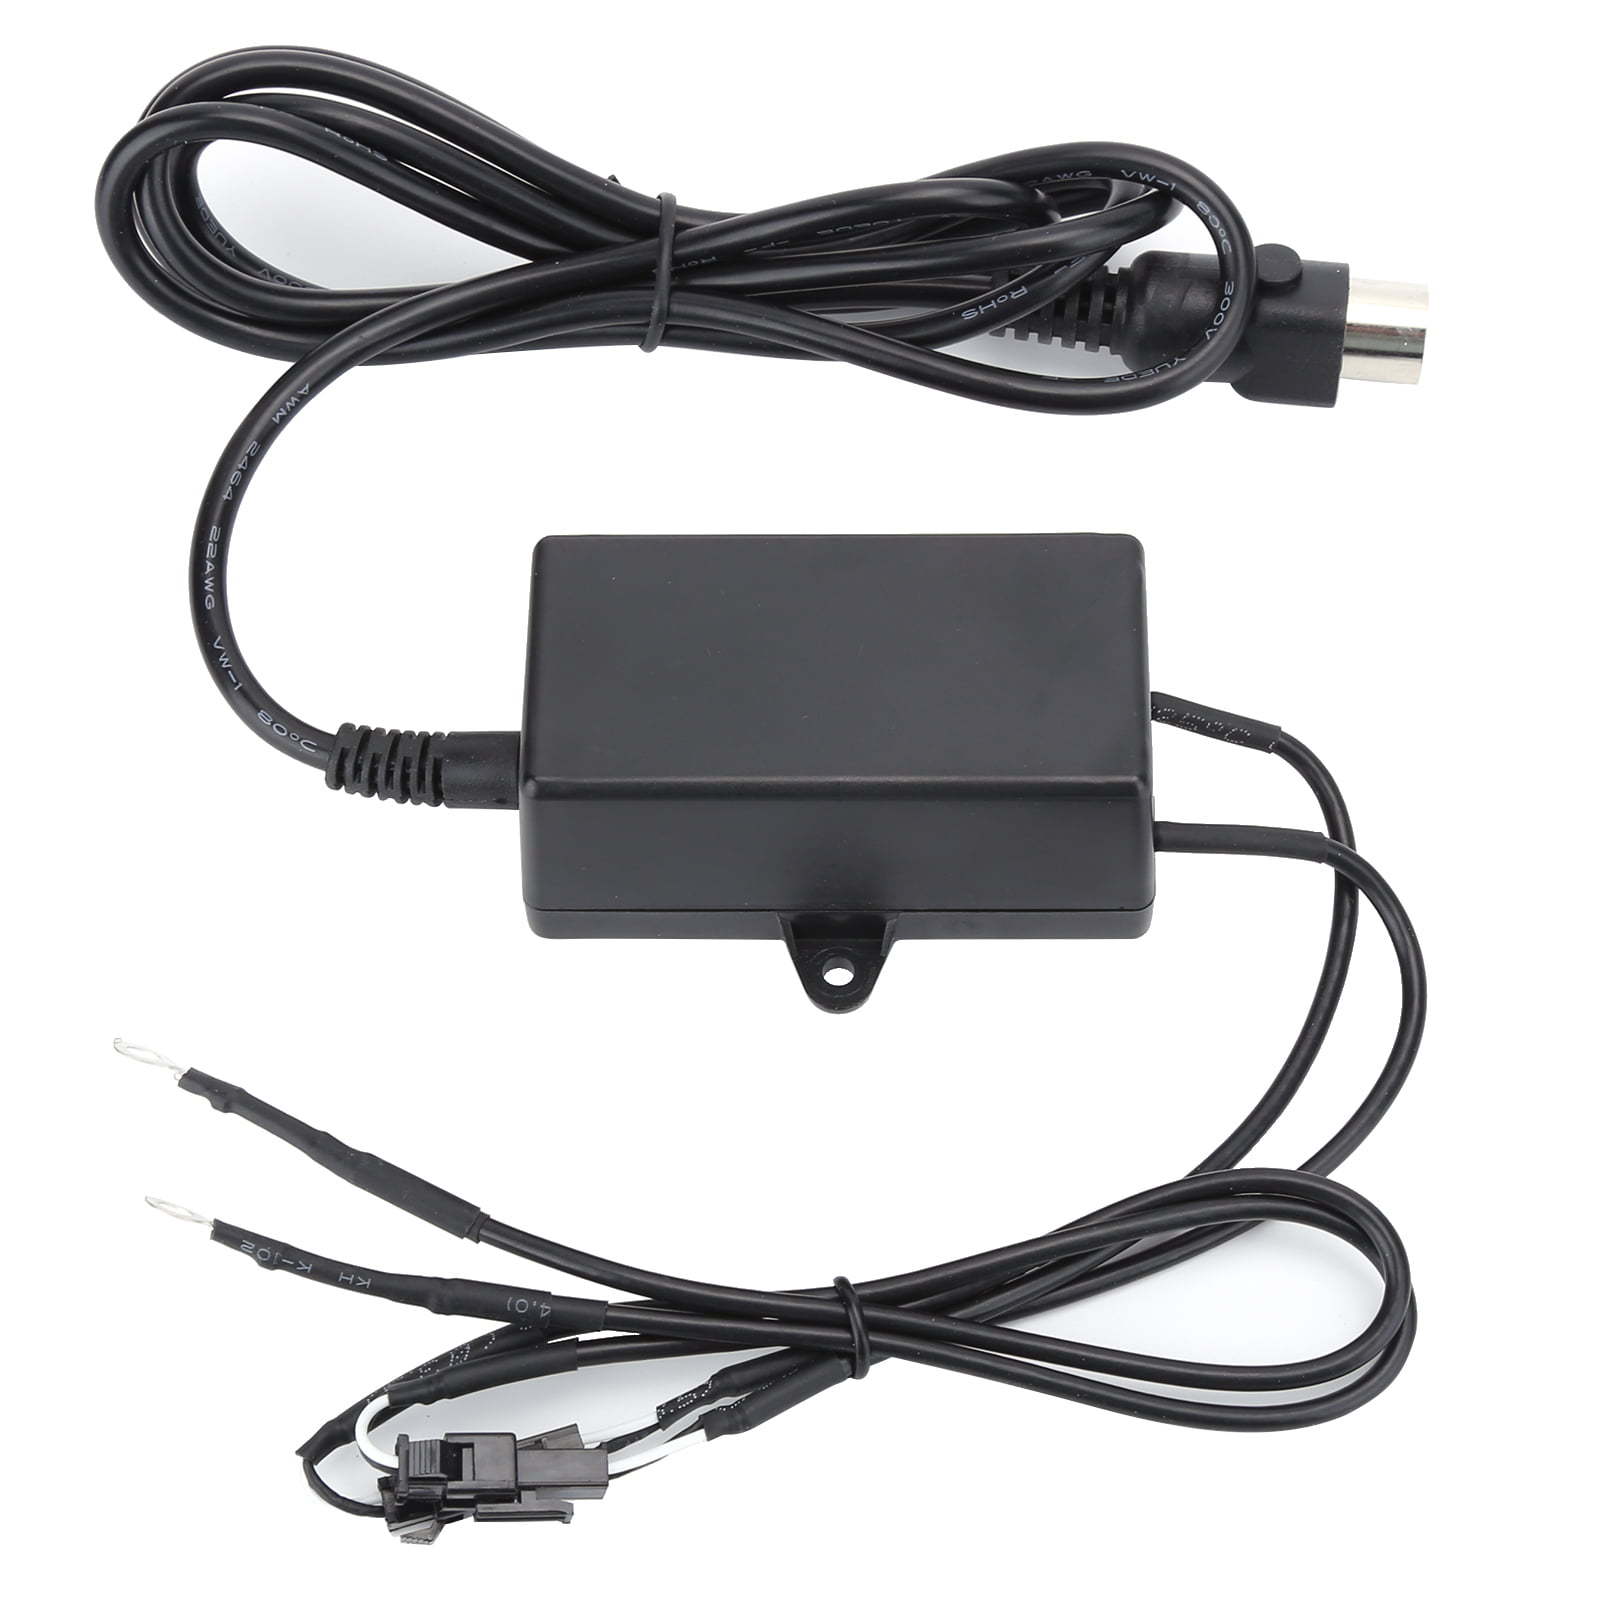 Cergrey Recliner Power Supply,Touch Control Power Supply Transformer ...